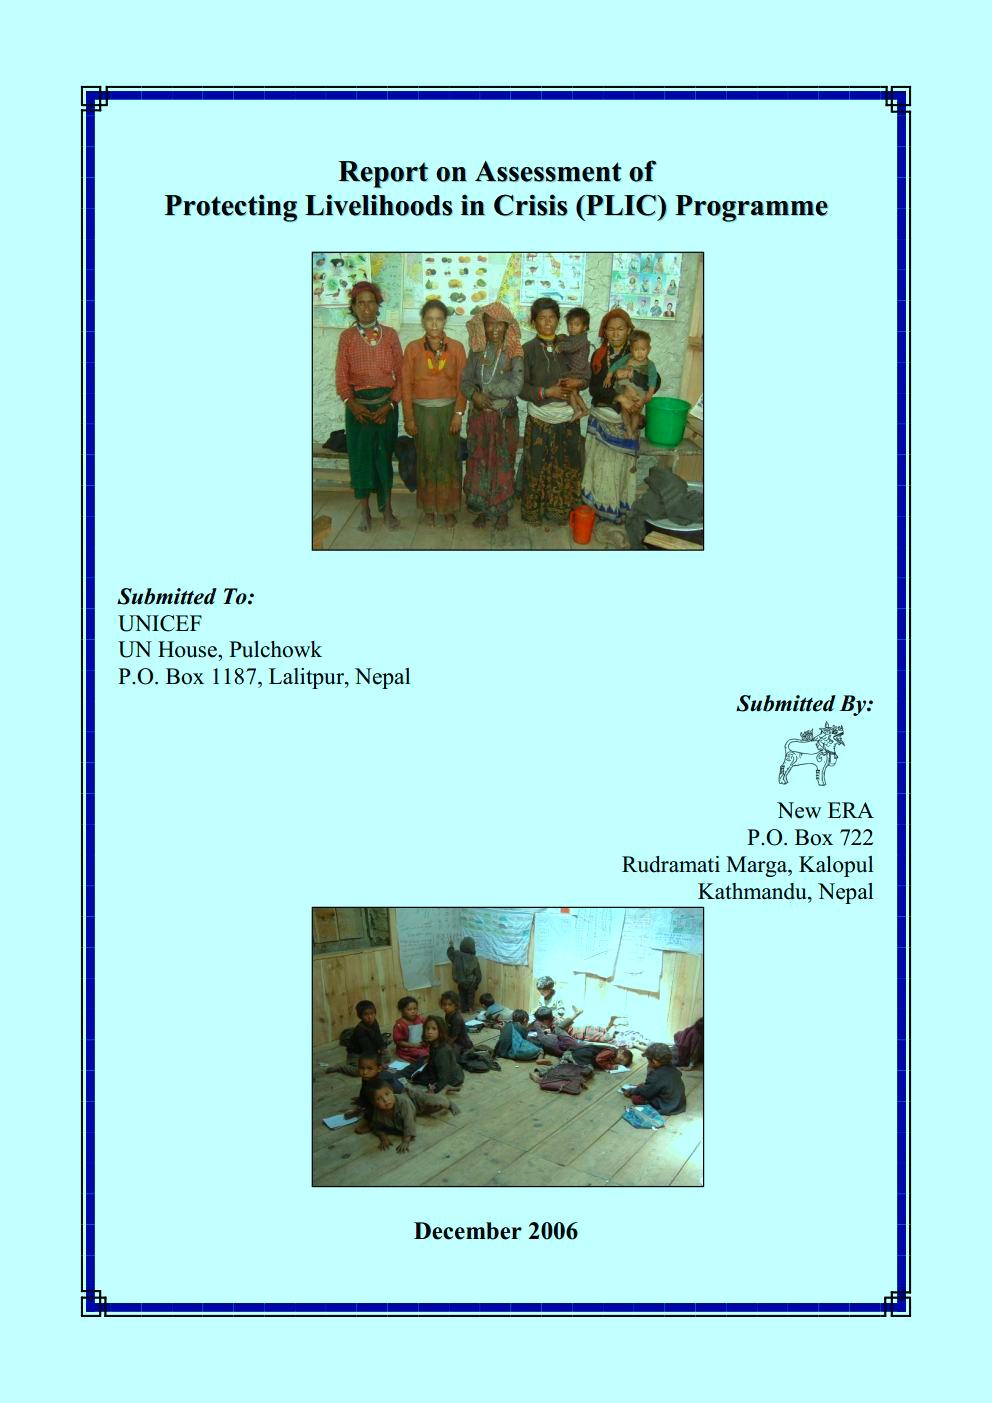 Report on Assessment of Protecting Livelihood in Crisis (PLIC) Programme